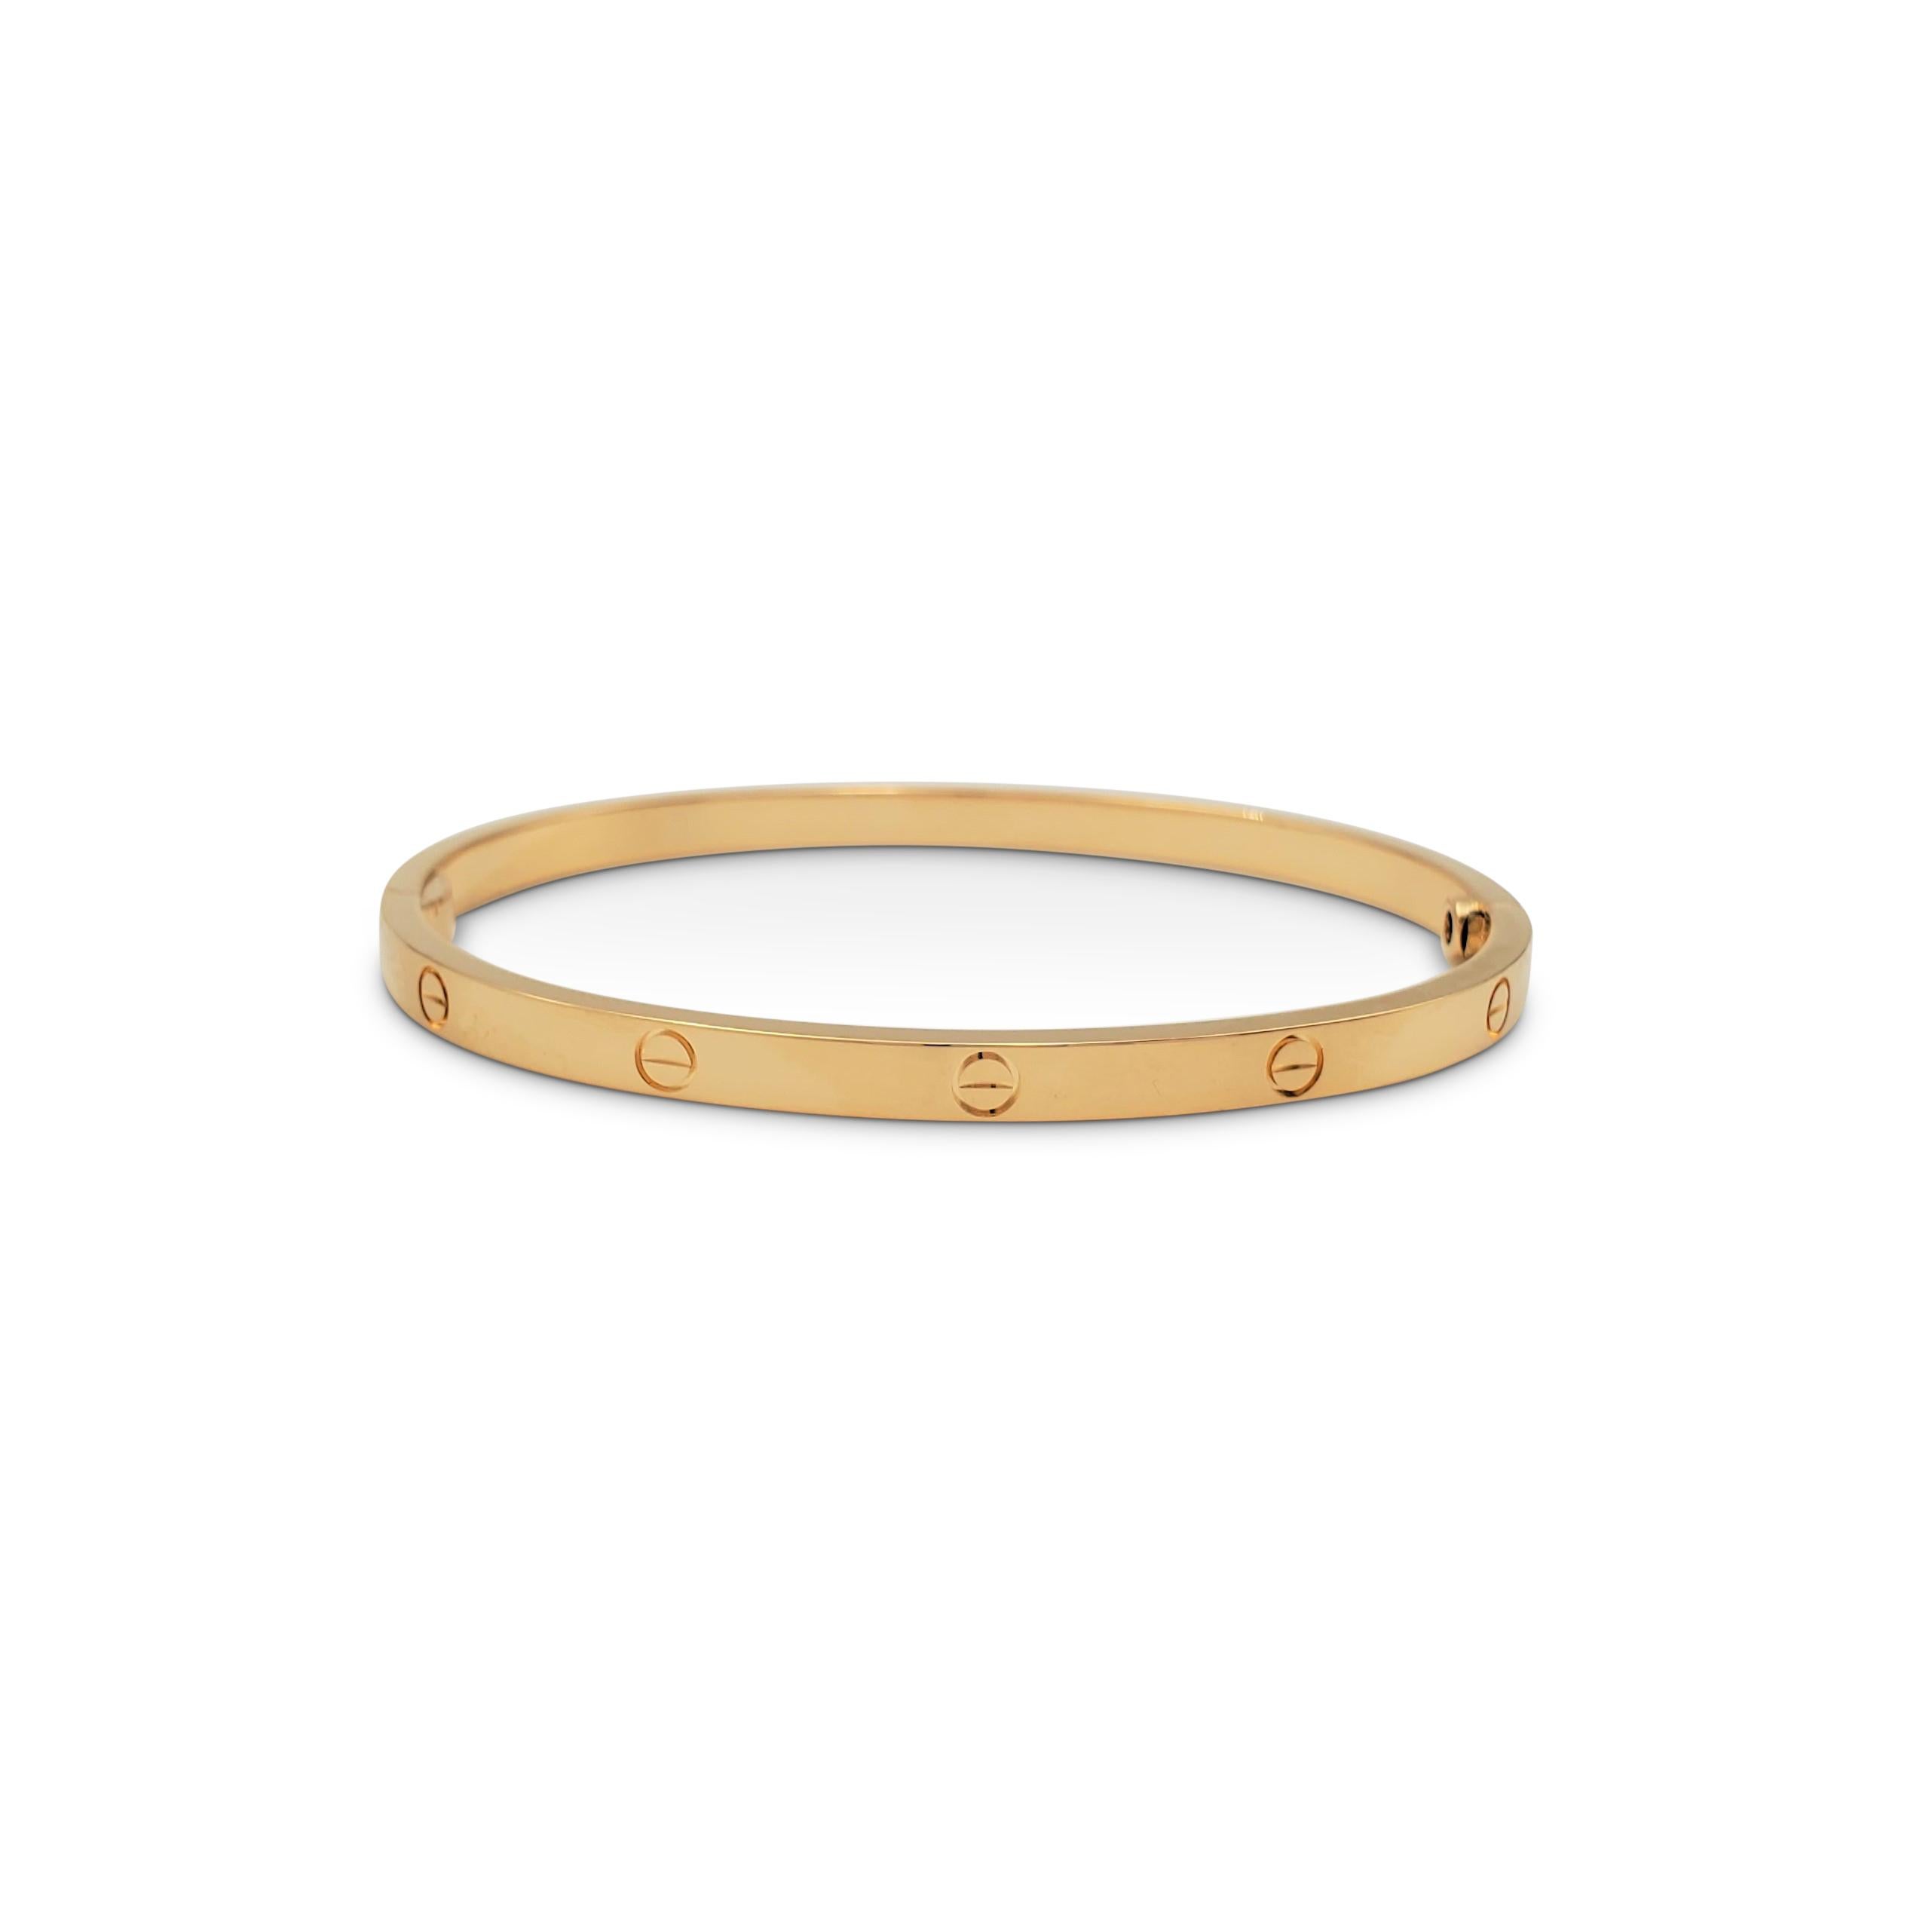 Authentic Cartier 'Love' bracelet crafted in 18 karat yellow gold. Size 16. Signed Cartier, 16, Au750, with serial number. The bracelet is presented with the original box, papers, and screwdriver. CIRCA 2010s.

Bracelet Size: 16 (16 cm)
Box: